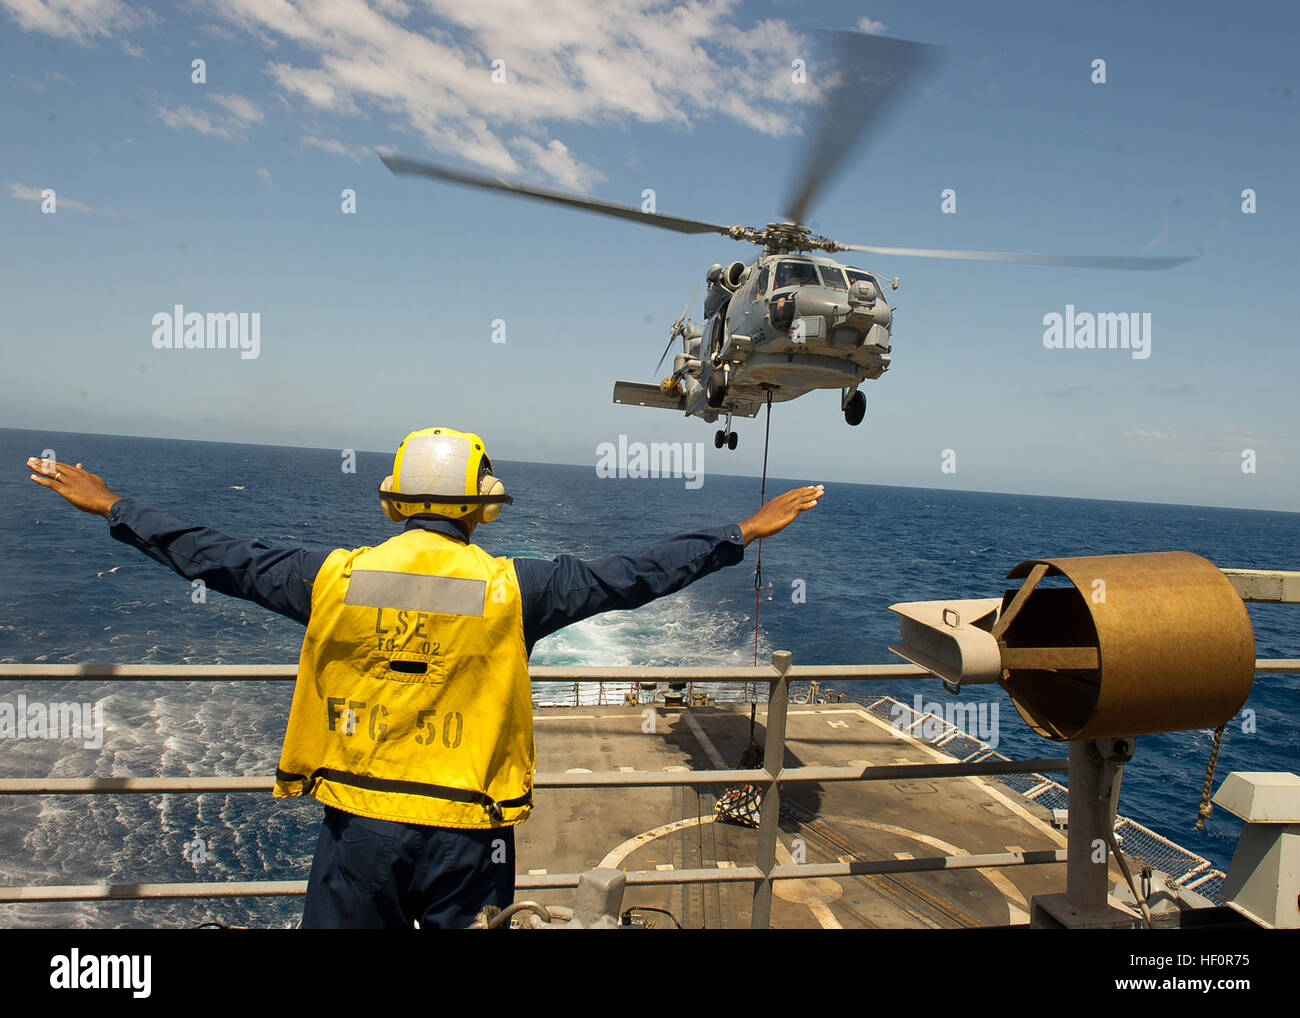 Boatswain’s Mate 3rd Class O’Bryant directs an SH-60B Seahawk, assigned to the “Vipers” of Helicopter Anti-Submarine Squadron Light 48, Det. 9, as it delivers supplies to guided-missile frigate USS Taylor (FFG-50). Taylor is assigned to commander, NATO Task Force 508 supporting Operation Ocean Shield, maritime interception operations and counter-piracy missions in the U.S. 5th Fleet area of responsibility. Flickr - DVIDSHUB - USS Taylor replenishment at sea (Image 4 of 9) Stock Photo